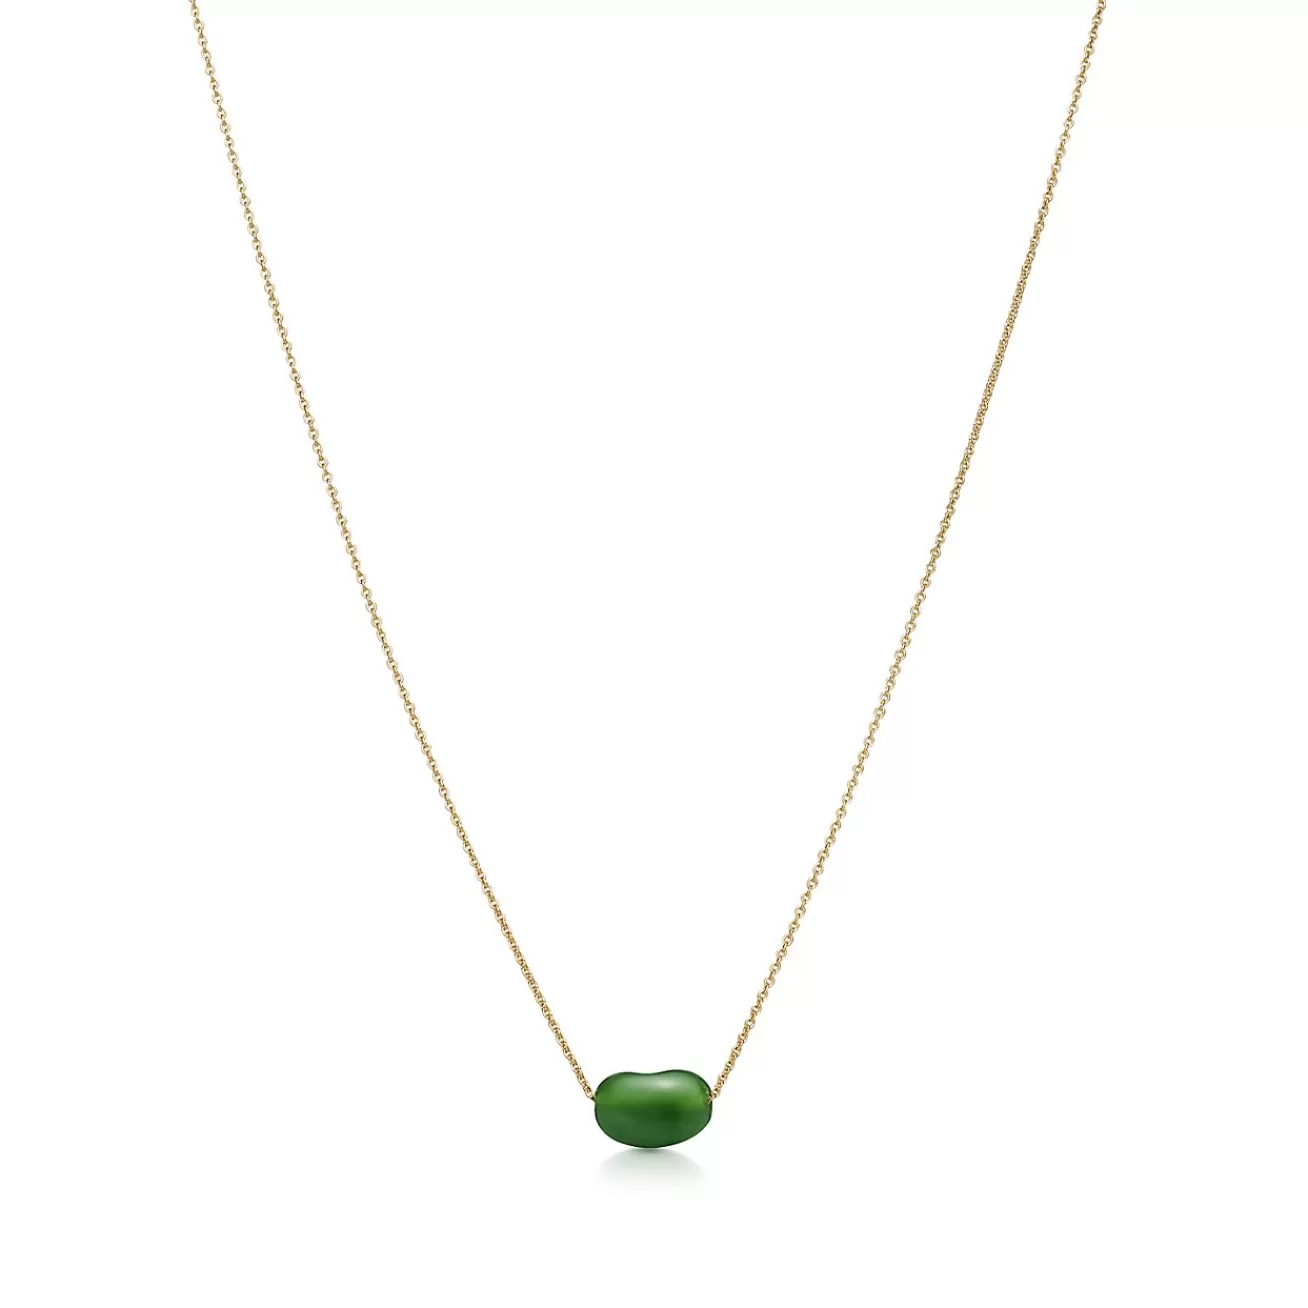 Tiffany & Co. Elsa Peretti® Bean® design Pendant in Yellow Gold with Green Jade, 9 mm | ^ Necklaces & Pendants | Gold Jewelry